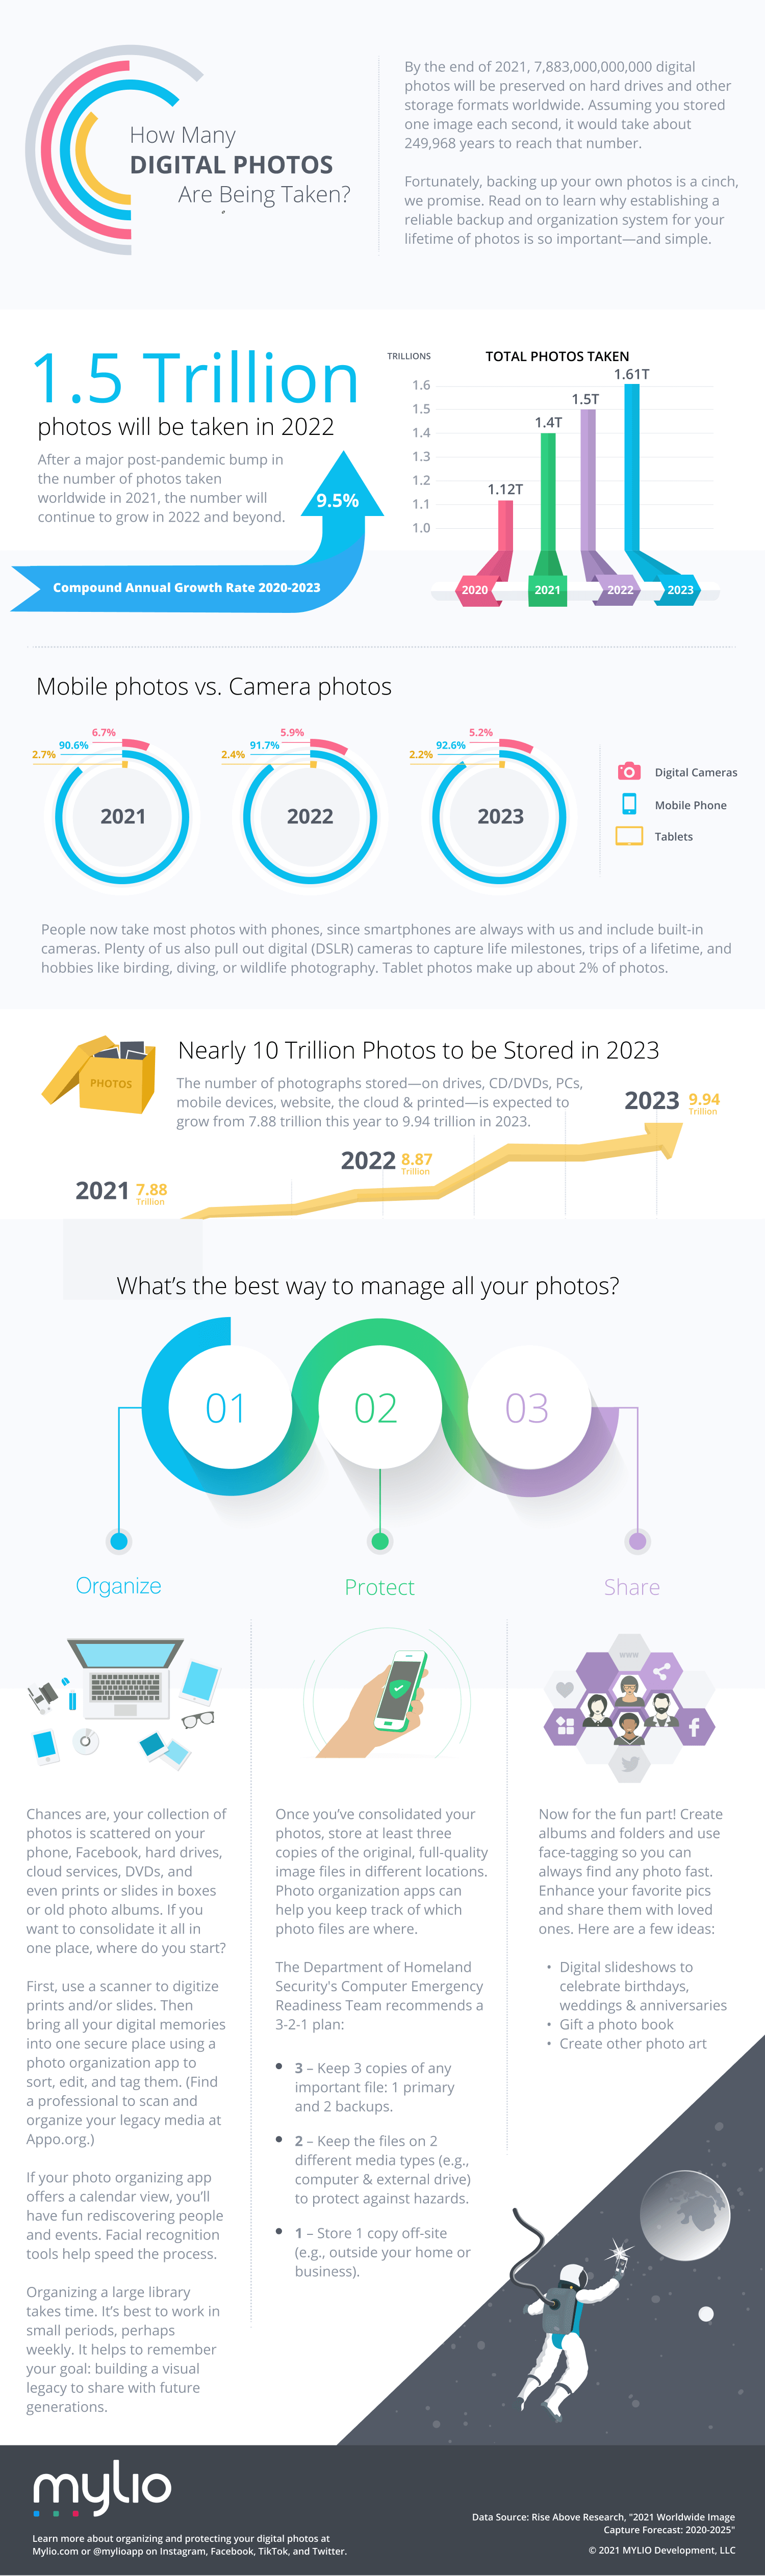 how-many-photos-will-be-taken-in-2022-mylio-app-infographic